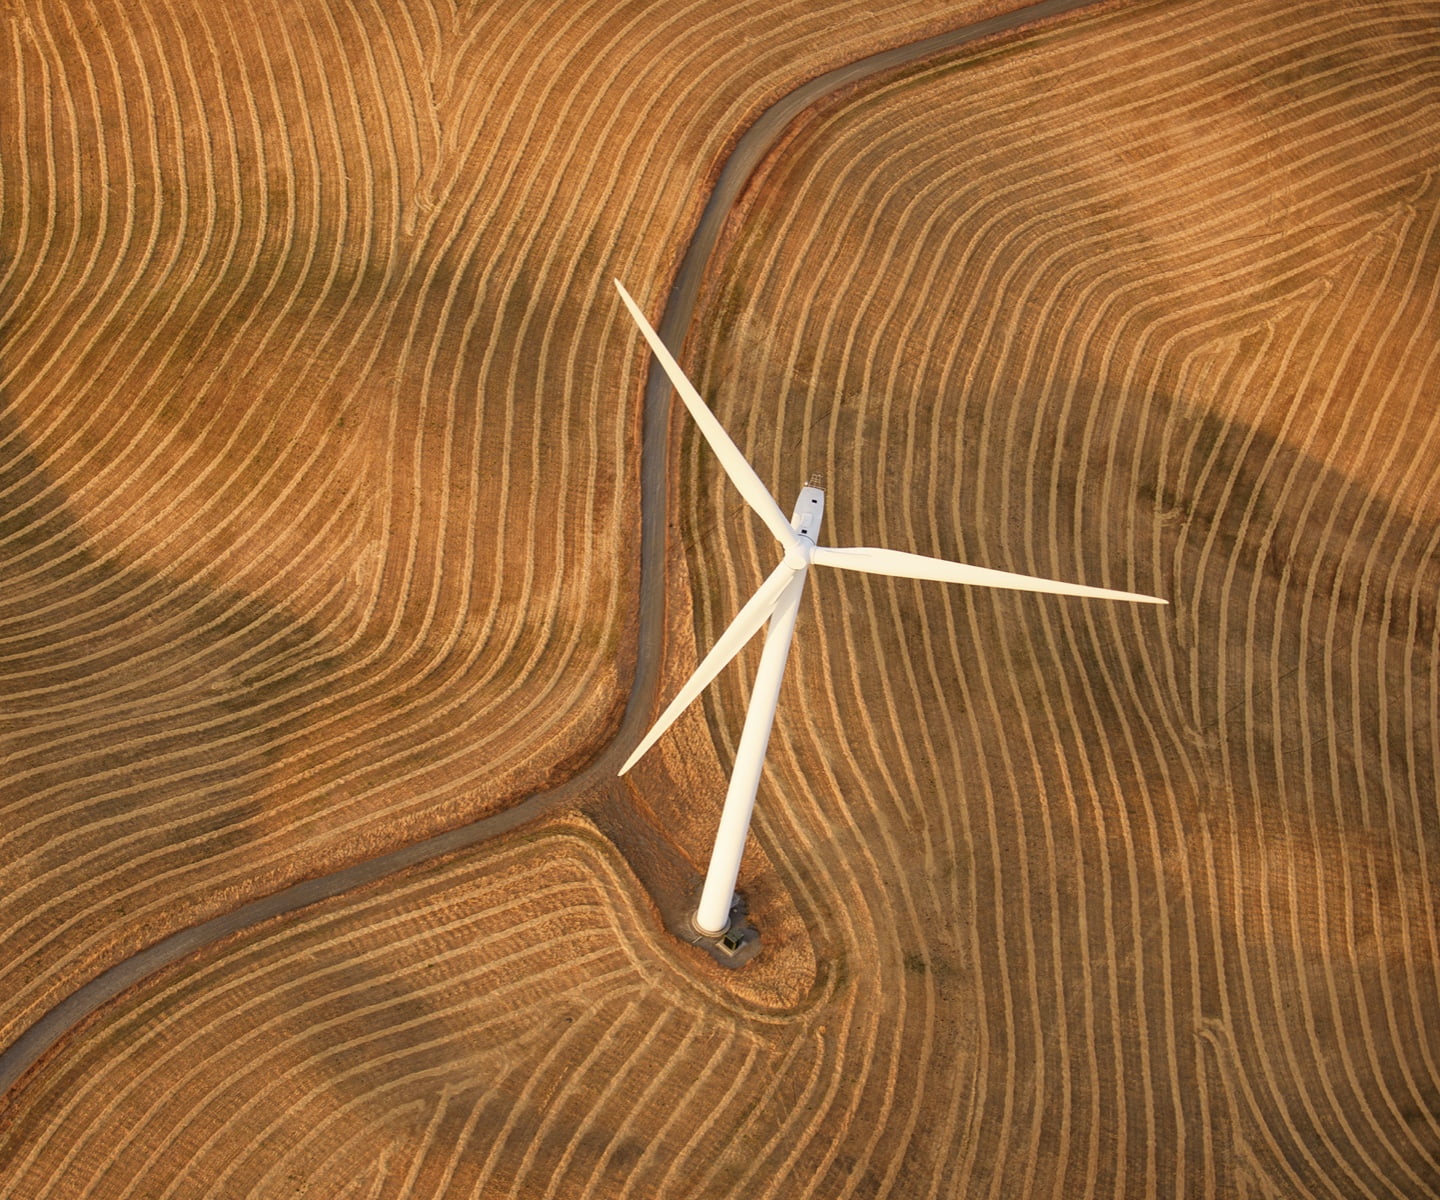 Wind turbine standing in the middle of a piece of agricultural land prepared for planting